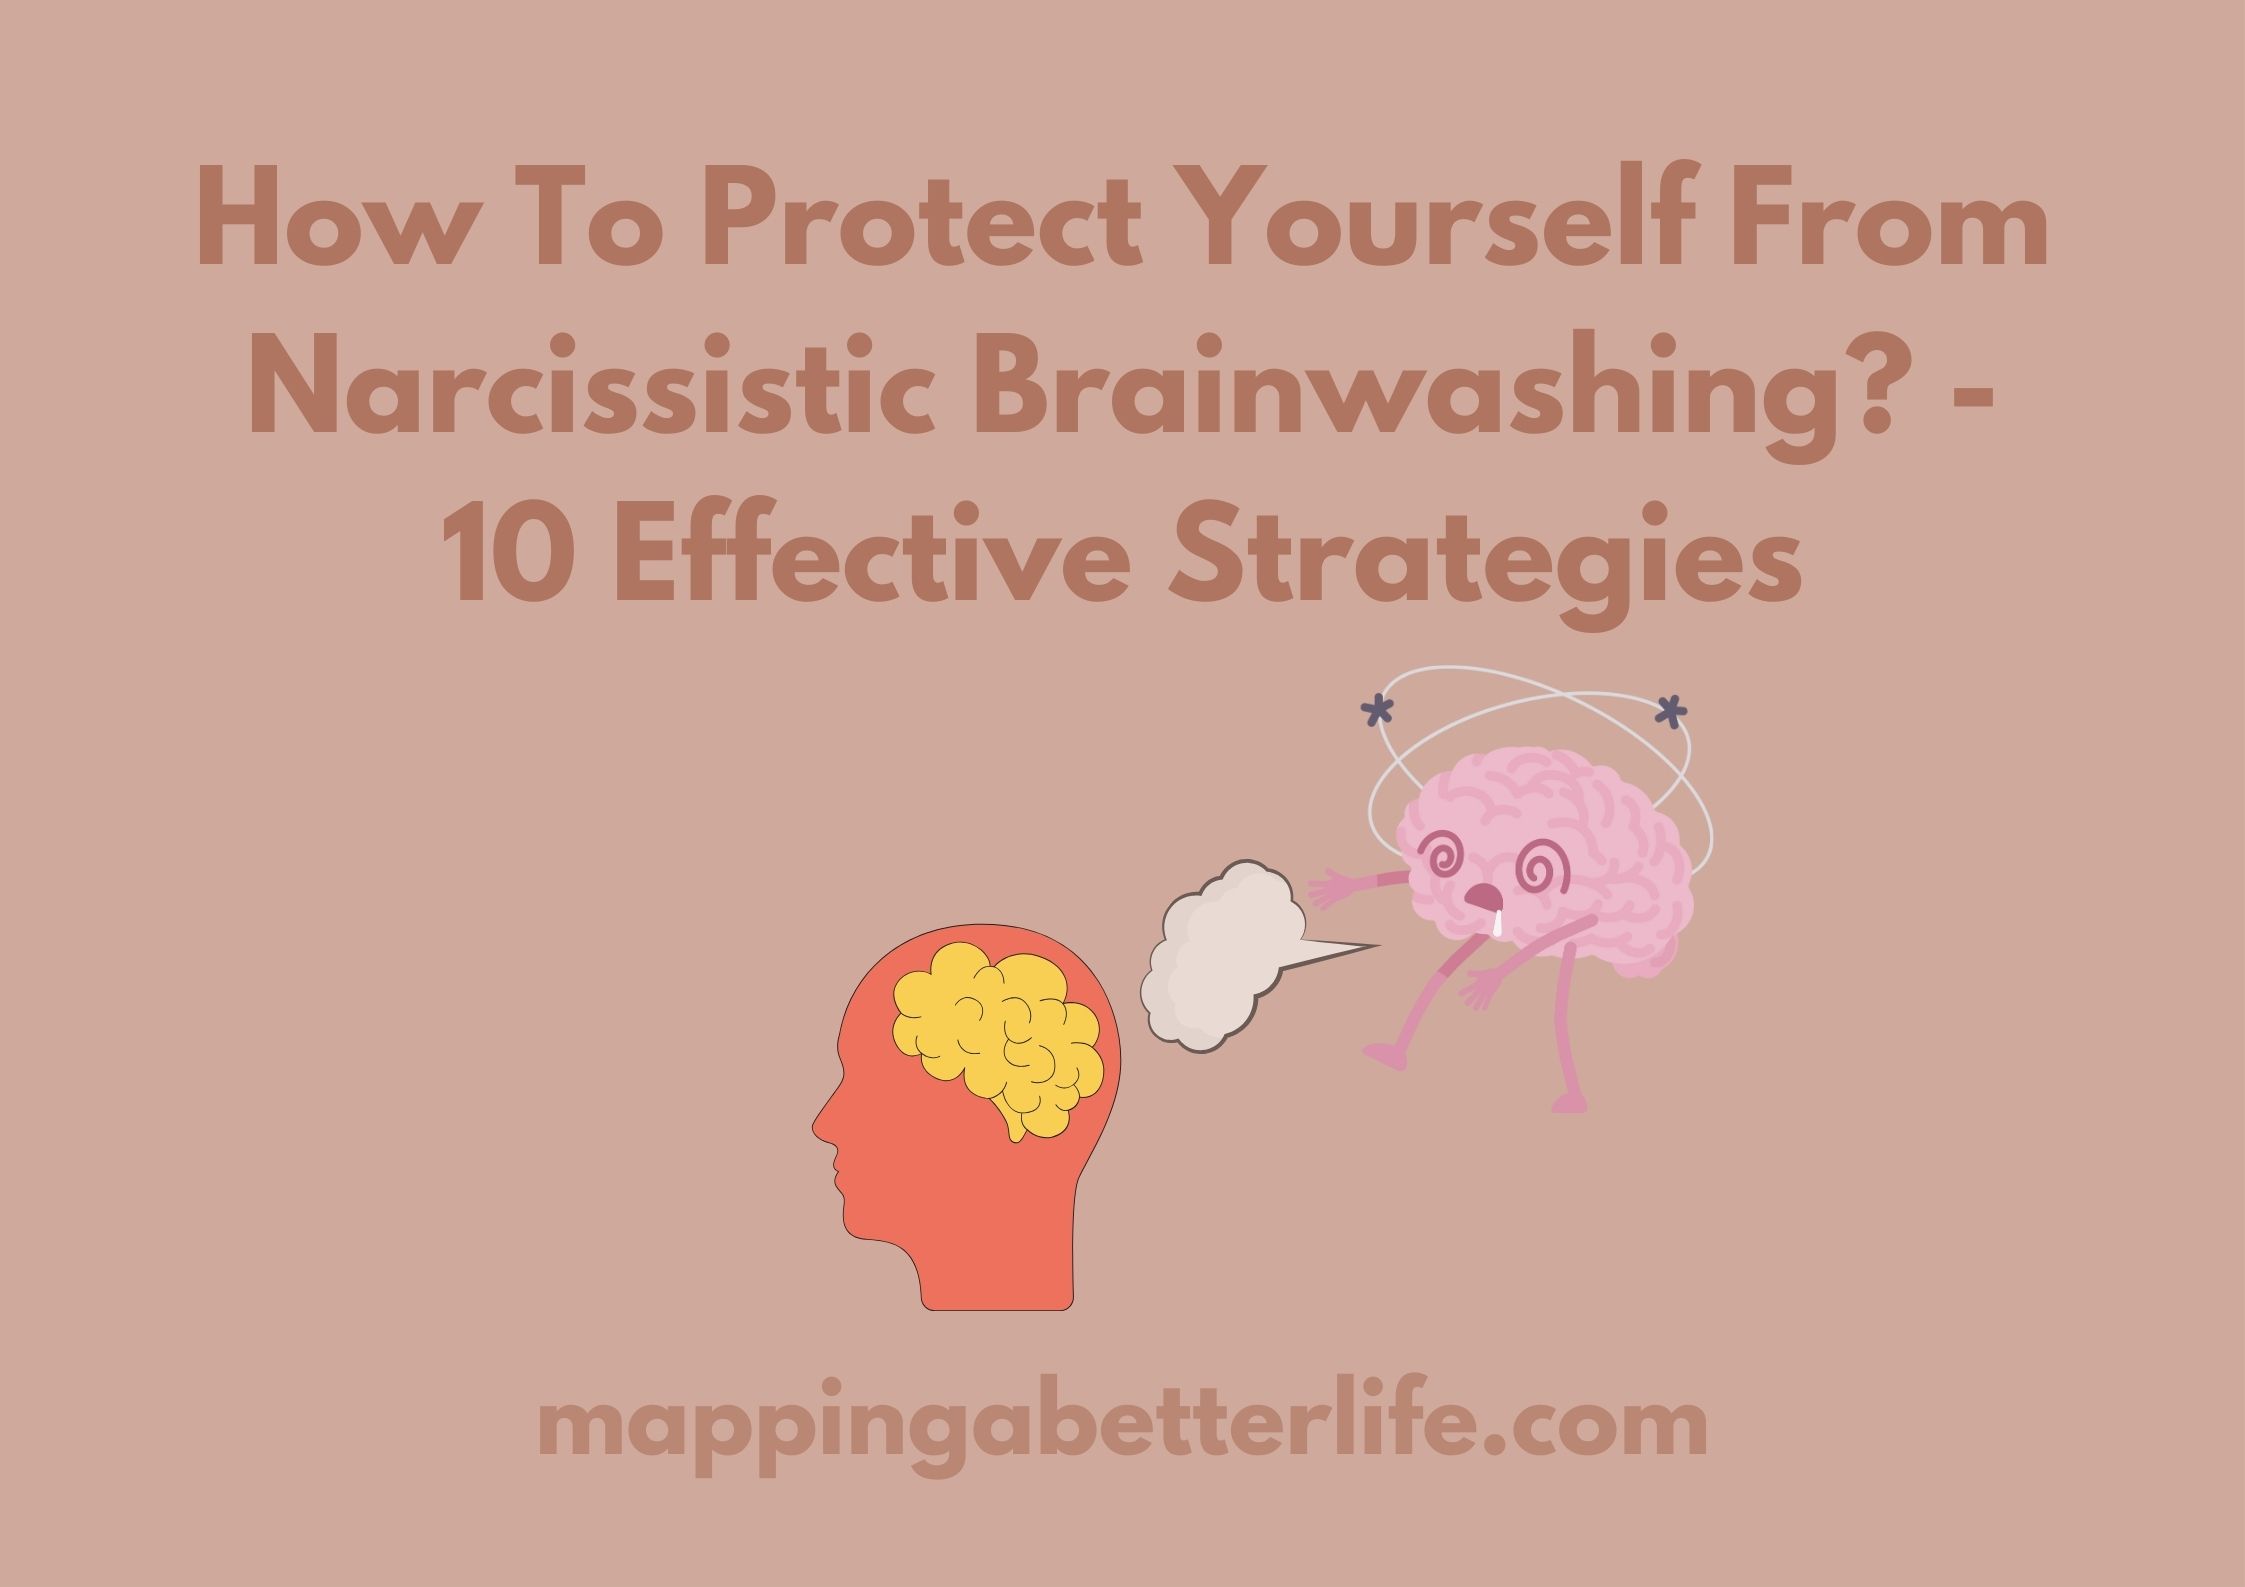 How To Protect Yourself From Narcissistic Brainwashing? - 10 Effective Strategies